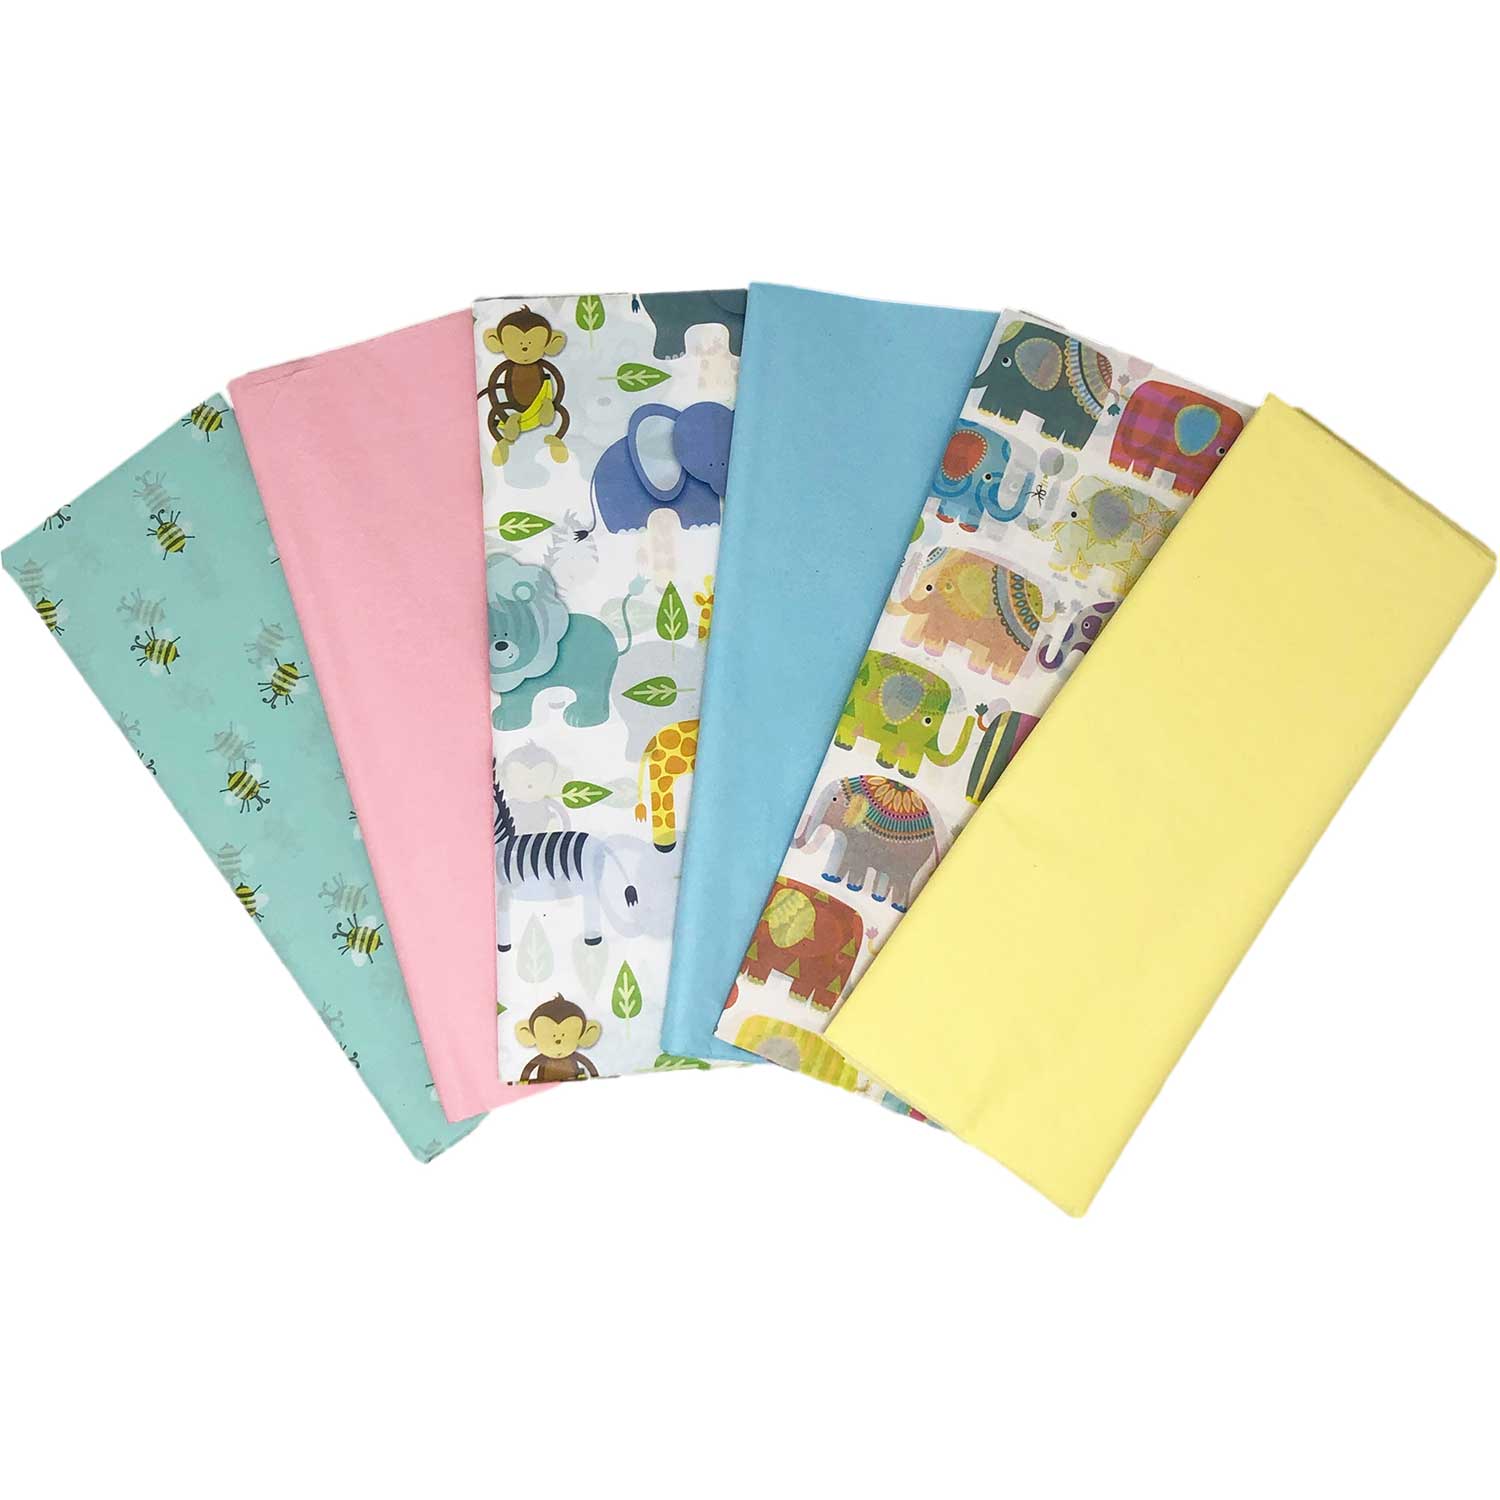 Baby Tissue Paper Assortment (6 Pack, 36 sheets total)